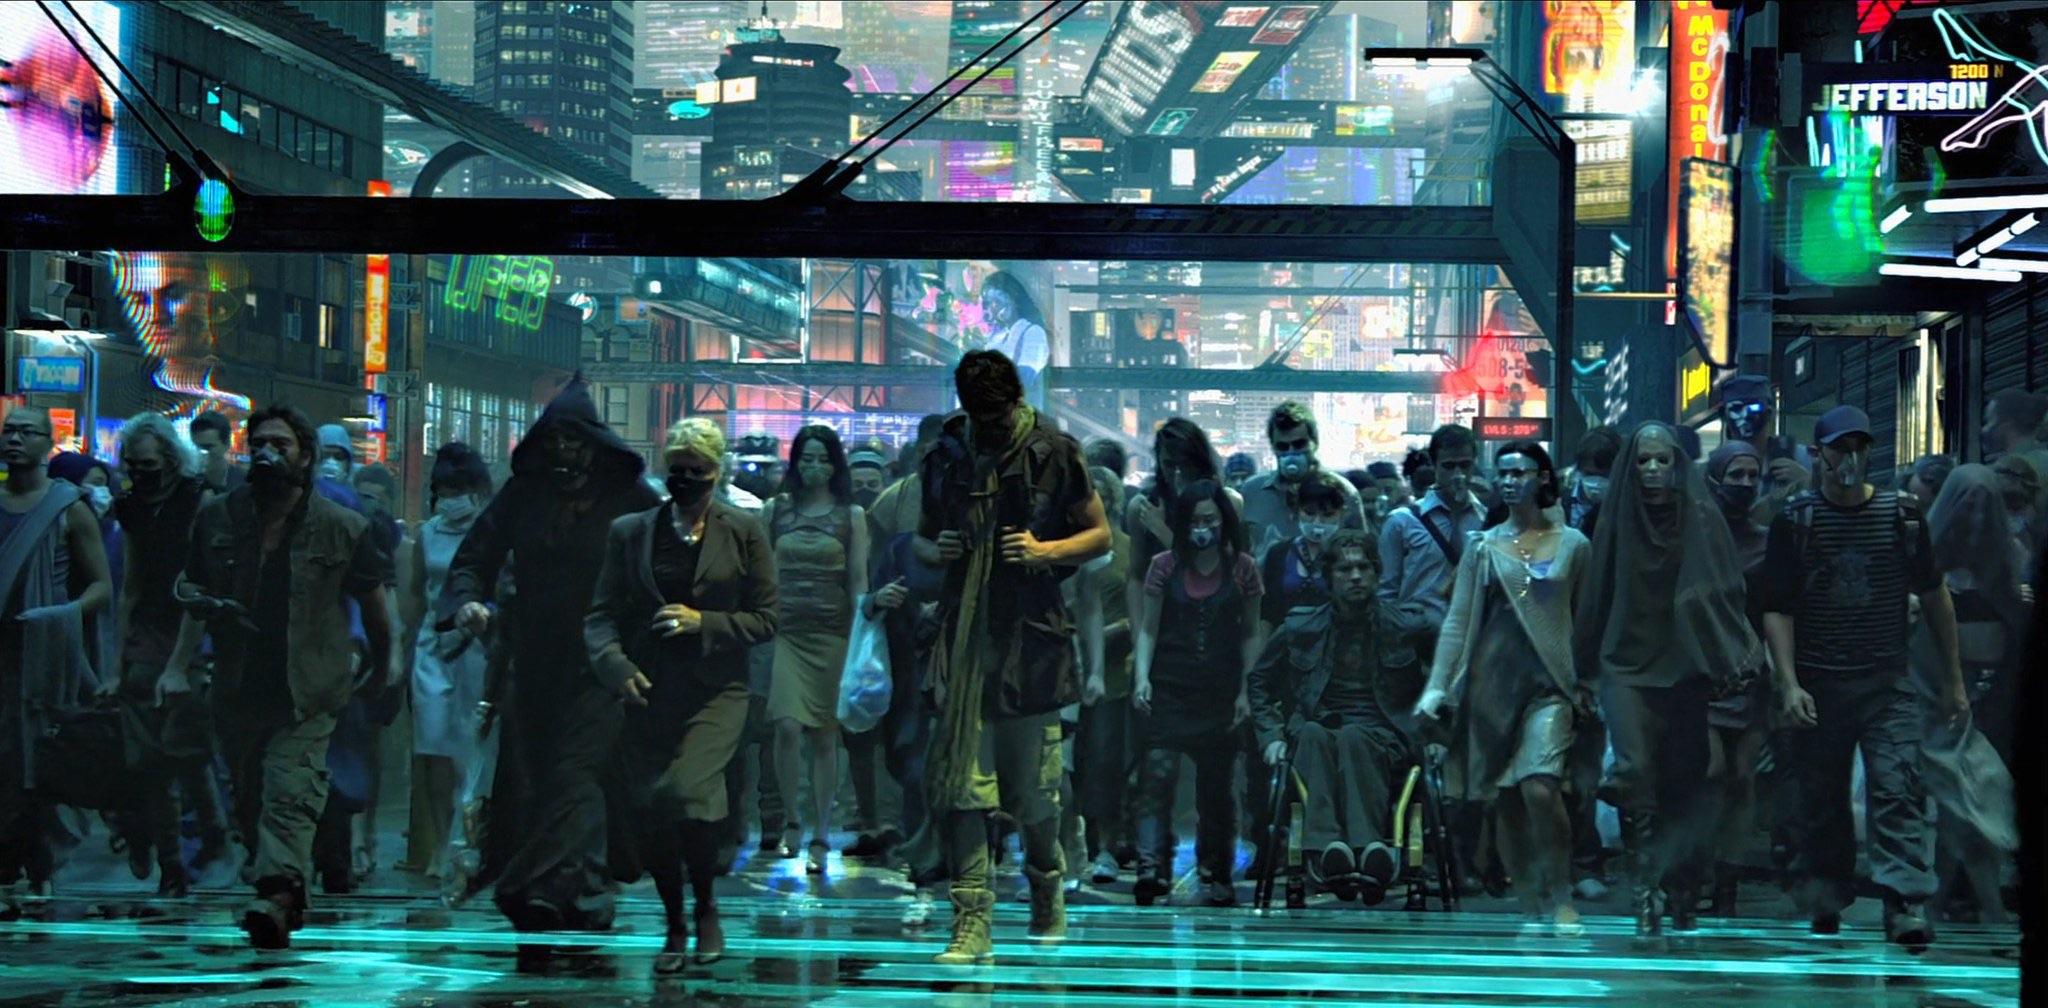 Can we take time to appreciate and analyze the clothing aesthetic on Earth? We've seen a million different neon Cyberpunk cities, but something about the clothing aesthetic on Earth just hits right